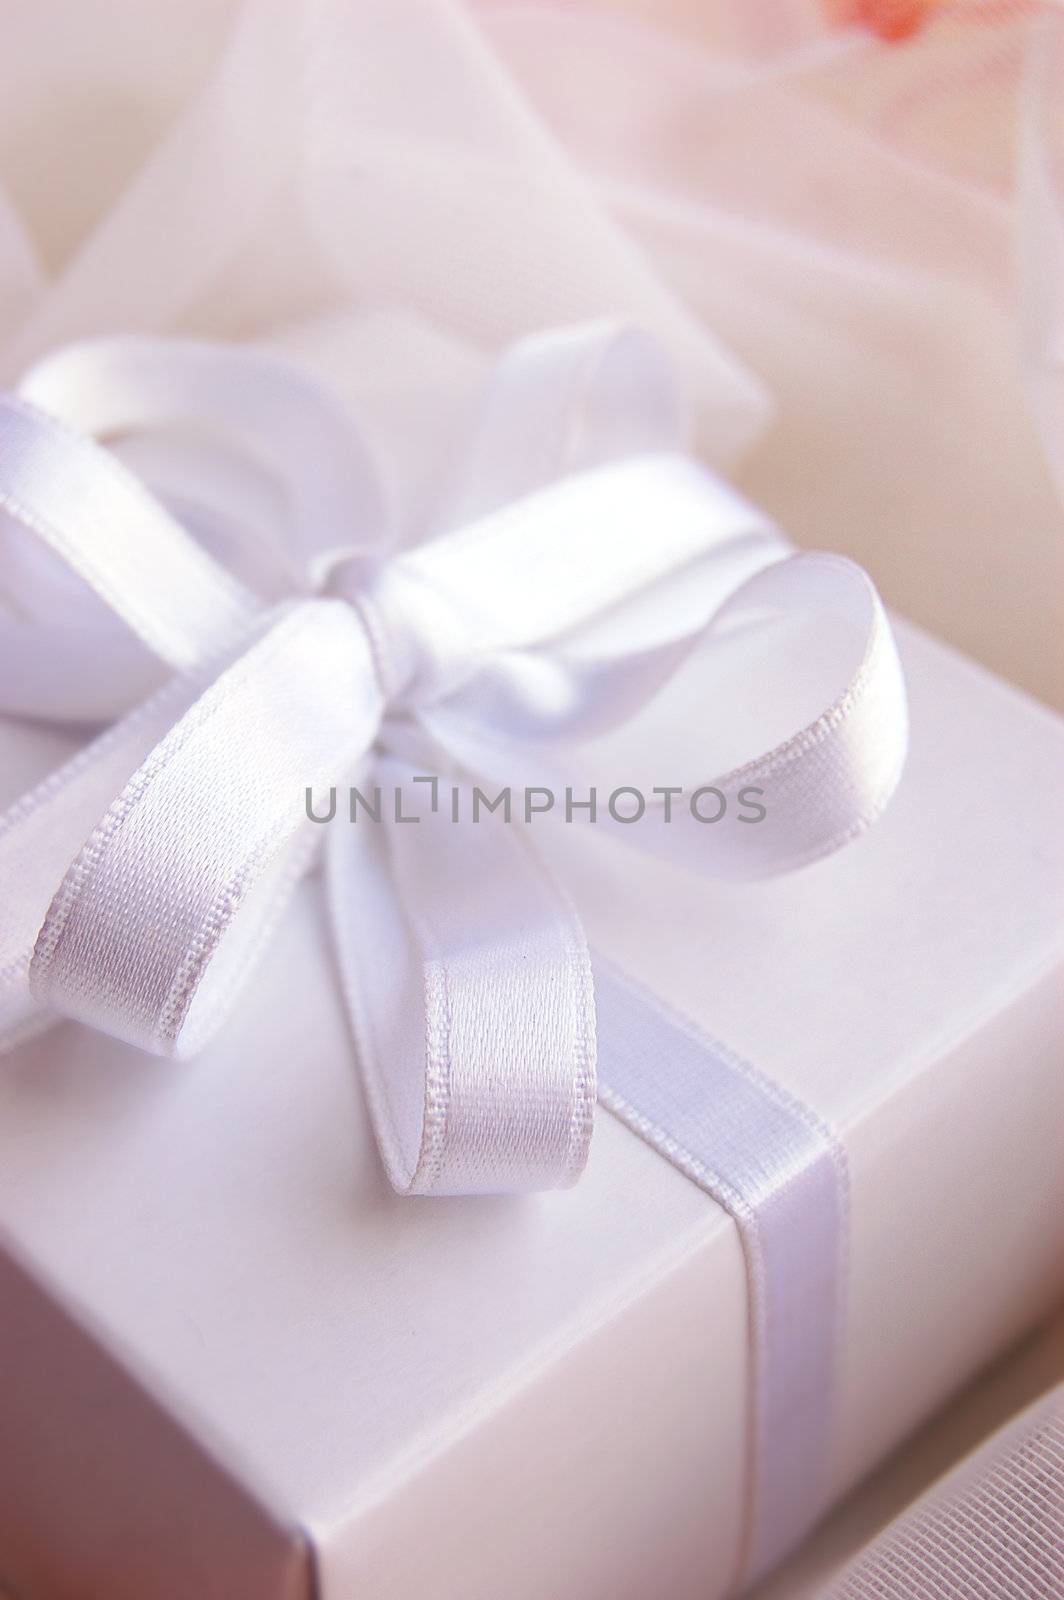 Present white box with silky ribbon in laces